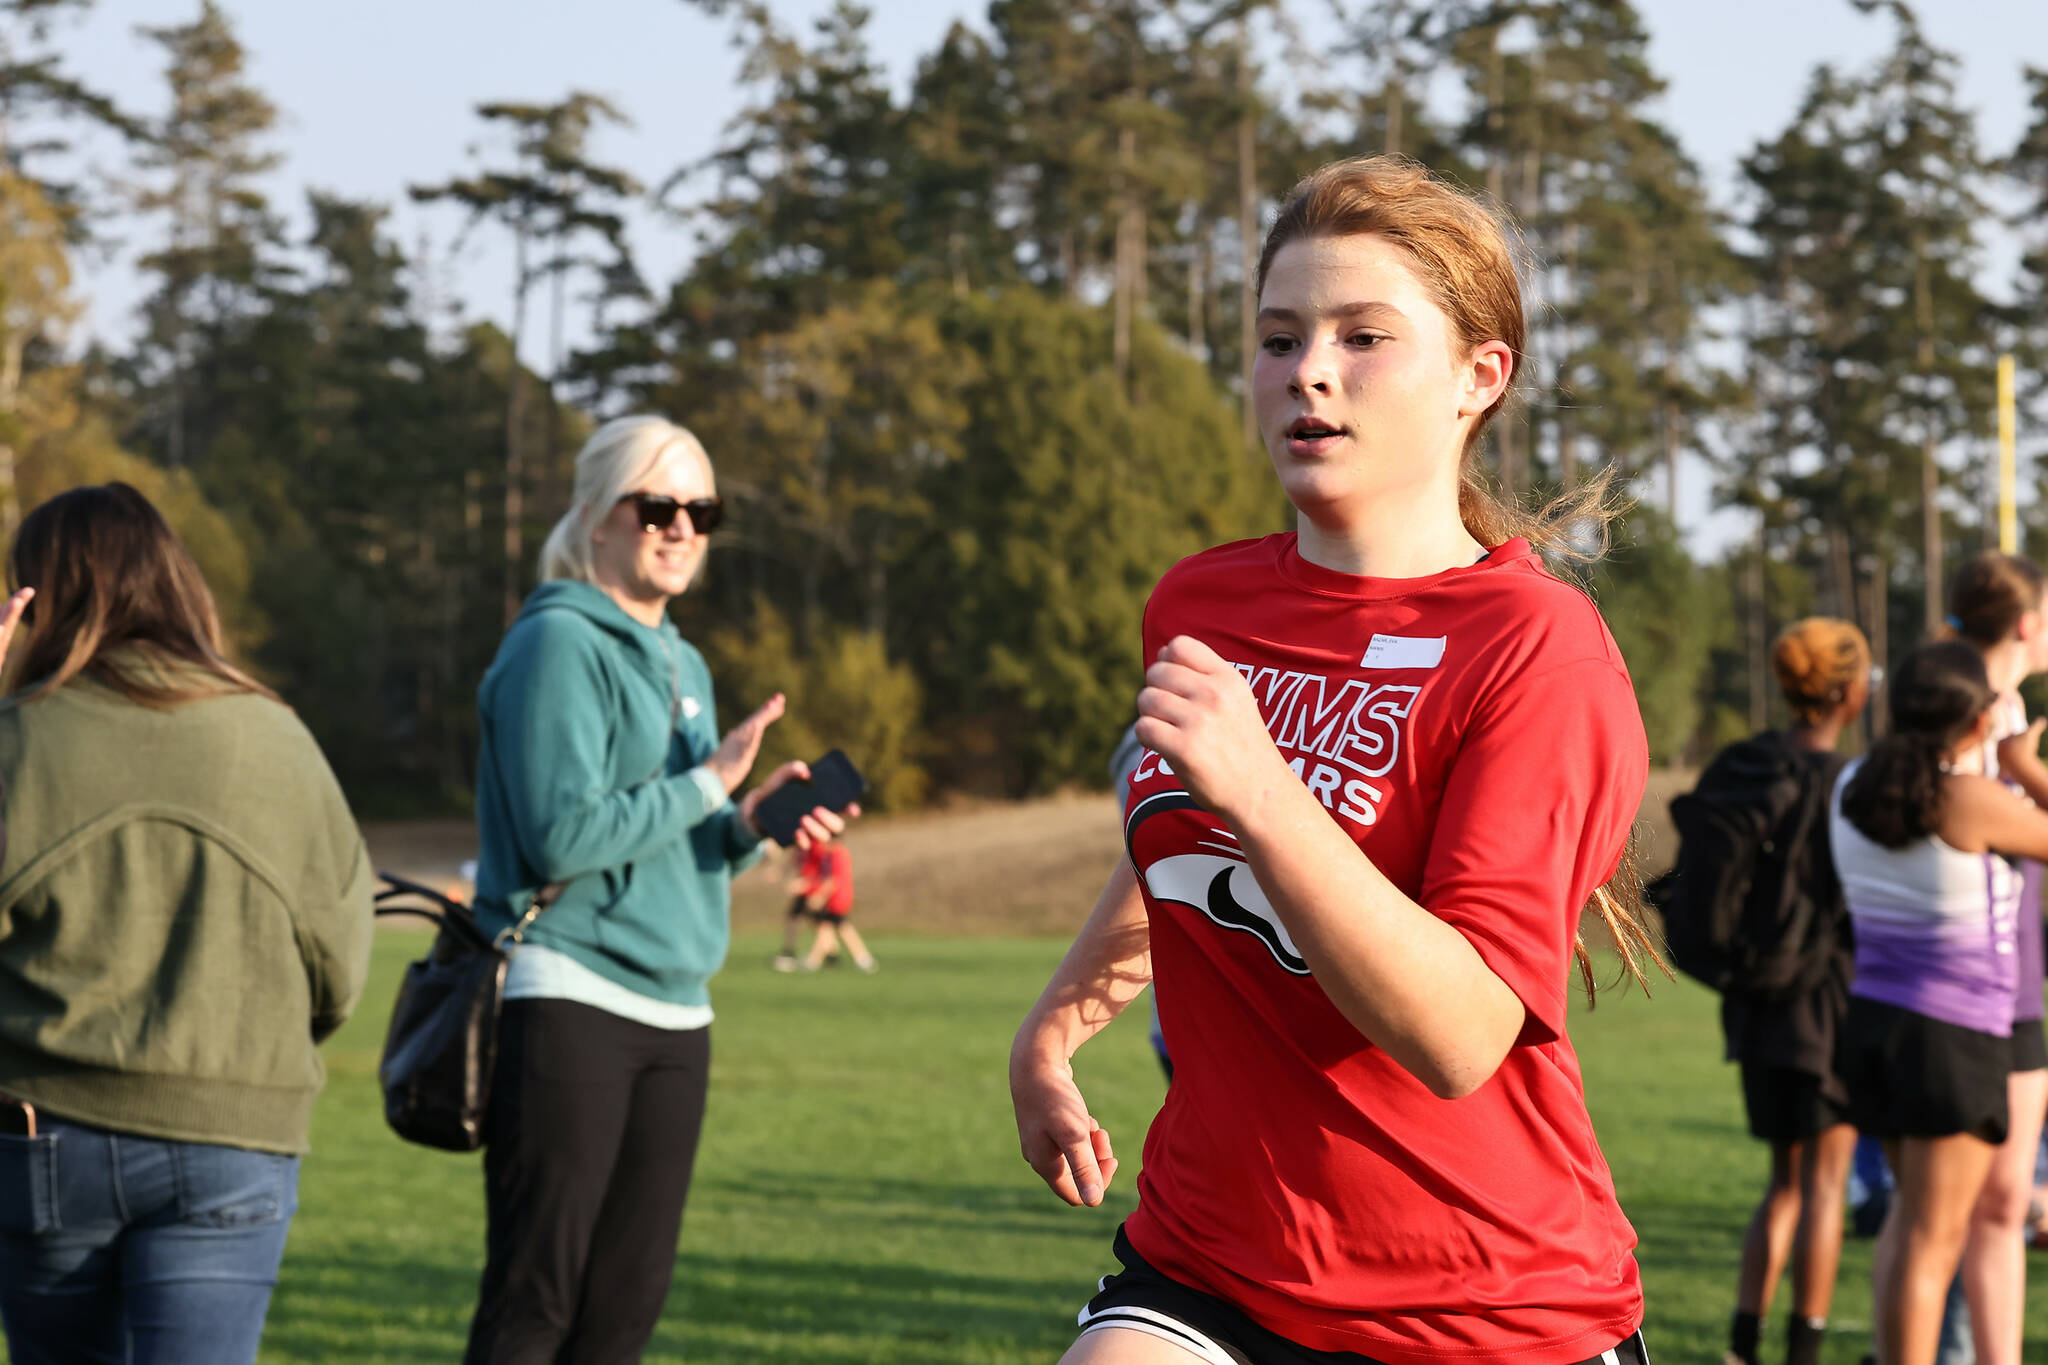 Photos by John Fisken
North Whidbey Middle School eighth grader Eva Bazar runs in the final cross country meet of the season in Oak Harbor on Tuesday. She finished 17th in her race.